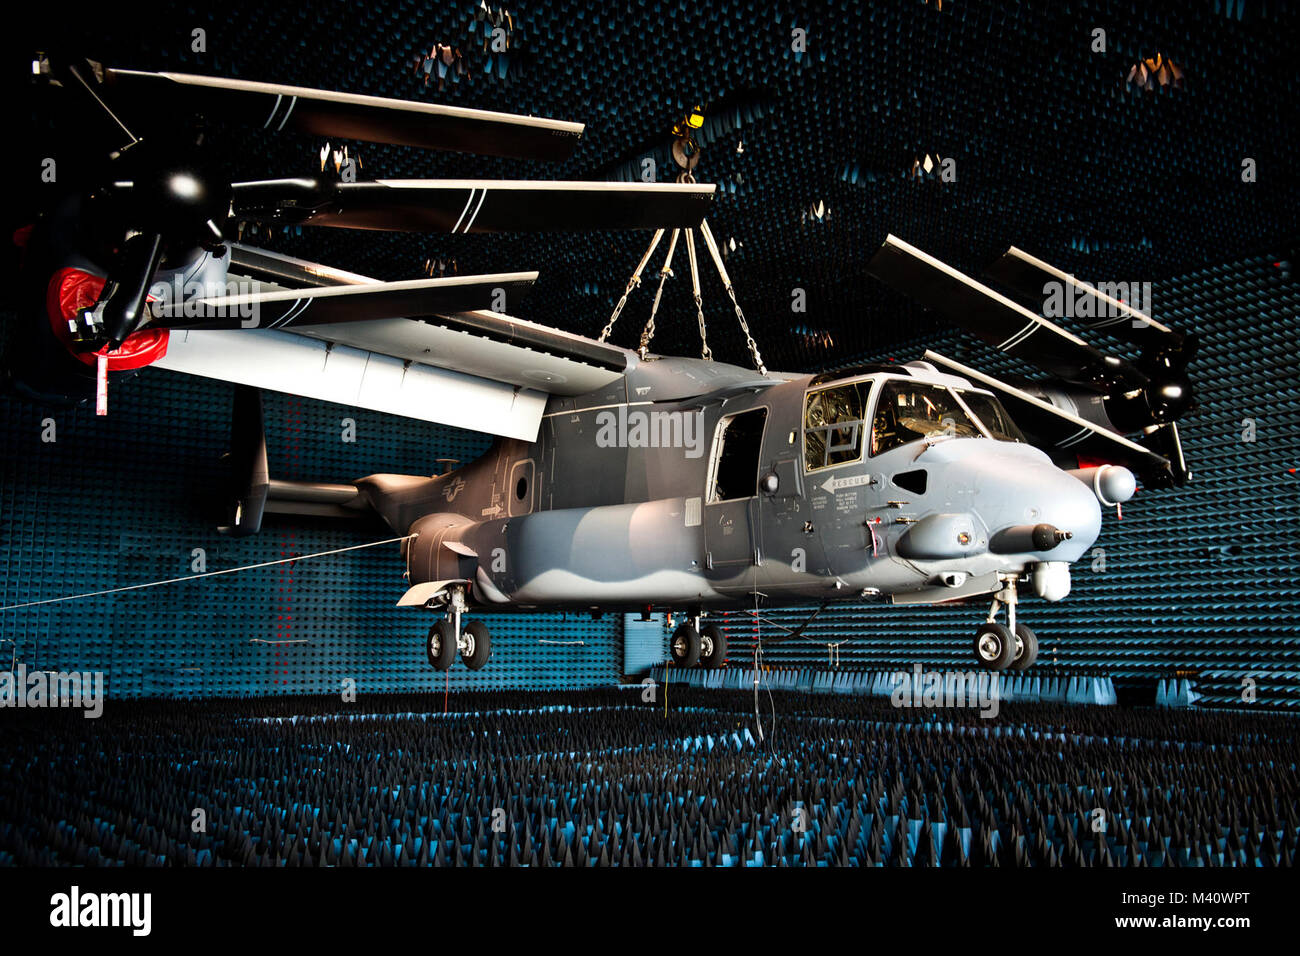 A CV-22 Osprey, flown by the 8th Special Operations Squadron, hangs in the anechoic chamber at the Joint Preflight Integration of Munitions and Electronic Systems hangar at Eglin Air Force Base, Fla.  The Osprey is in the chamber for approximately four weeks to test upgraded electronic warfare systems.  The J-PRIMES anechoic chamber is a room designed to stop internal reflections of electromagnetic waves, as well as insulate from exterior sources of electromagnetic noise.  J-PRIMES provides this environment to facilitate testing air-to-air and air-to-surface munitions and electronics systems o Stock Photo